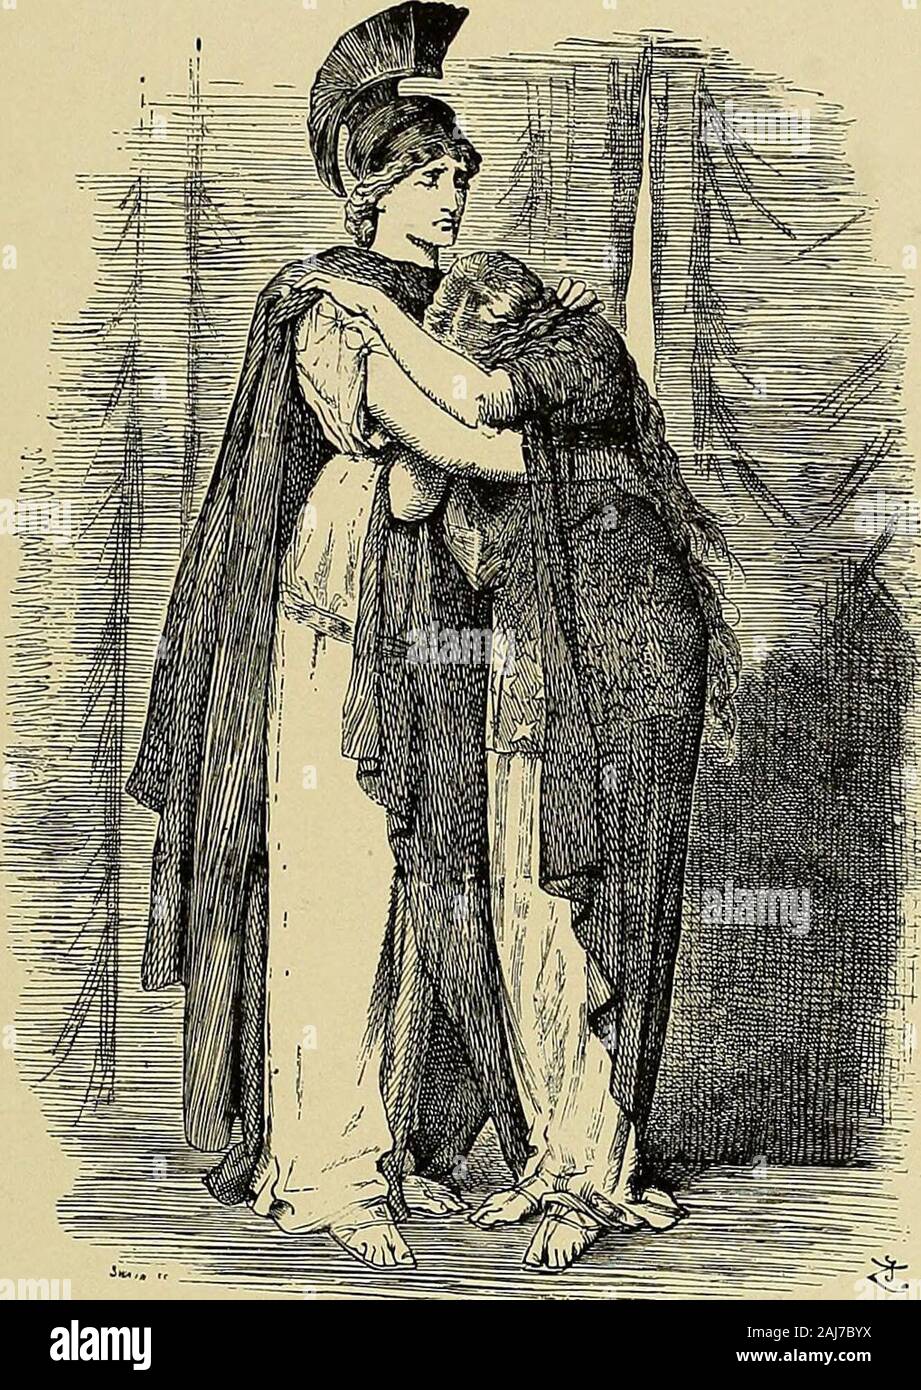 The history of the nineteenth century in caricature . J l ?s Ph ?& &lt; g Ph .a ro o -« C-* &lt;o &lt; ^ u u o 3! wQ w X H fe 1 O ^ CO »J Z pj w &gt; o m W &lt; £ B w H CENTURY IN CARICATURE 273. A COMMON SORROW. Syrie, which was published in Paris after the flight of theEmpress Eugenie. The Democratic cartoonists, besides their use of the Tat-tooed Man idea and the alleged scandals in Mr. Blainespolitical career, made a strong point of the soundness andcleanness of Mr. Clevelands official record. A typical cari-cature of this nature was that drawn by Gillam called WhyThey Dislike Him. It repr Stock Photo